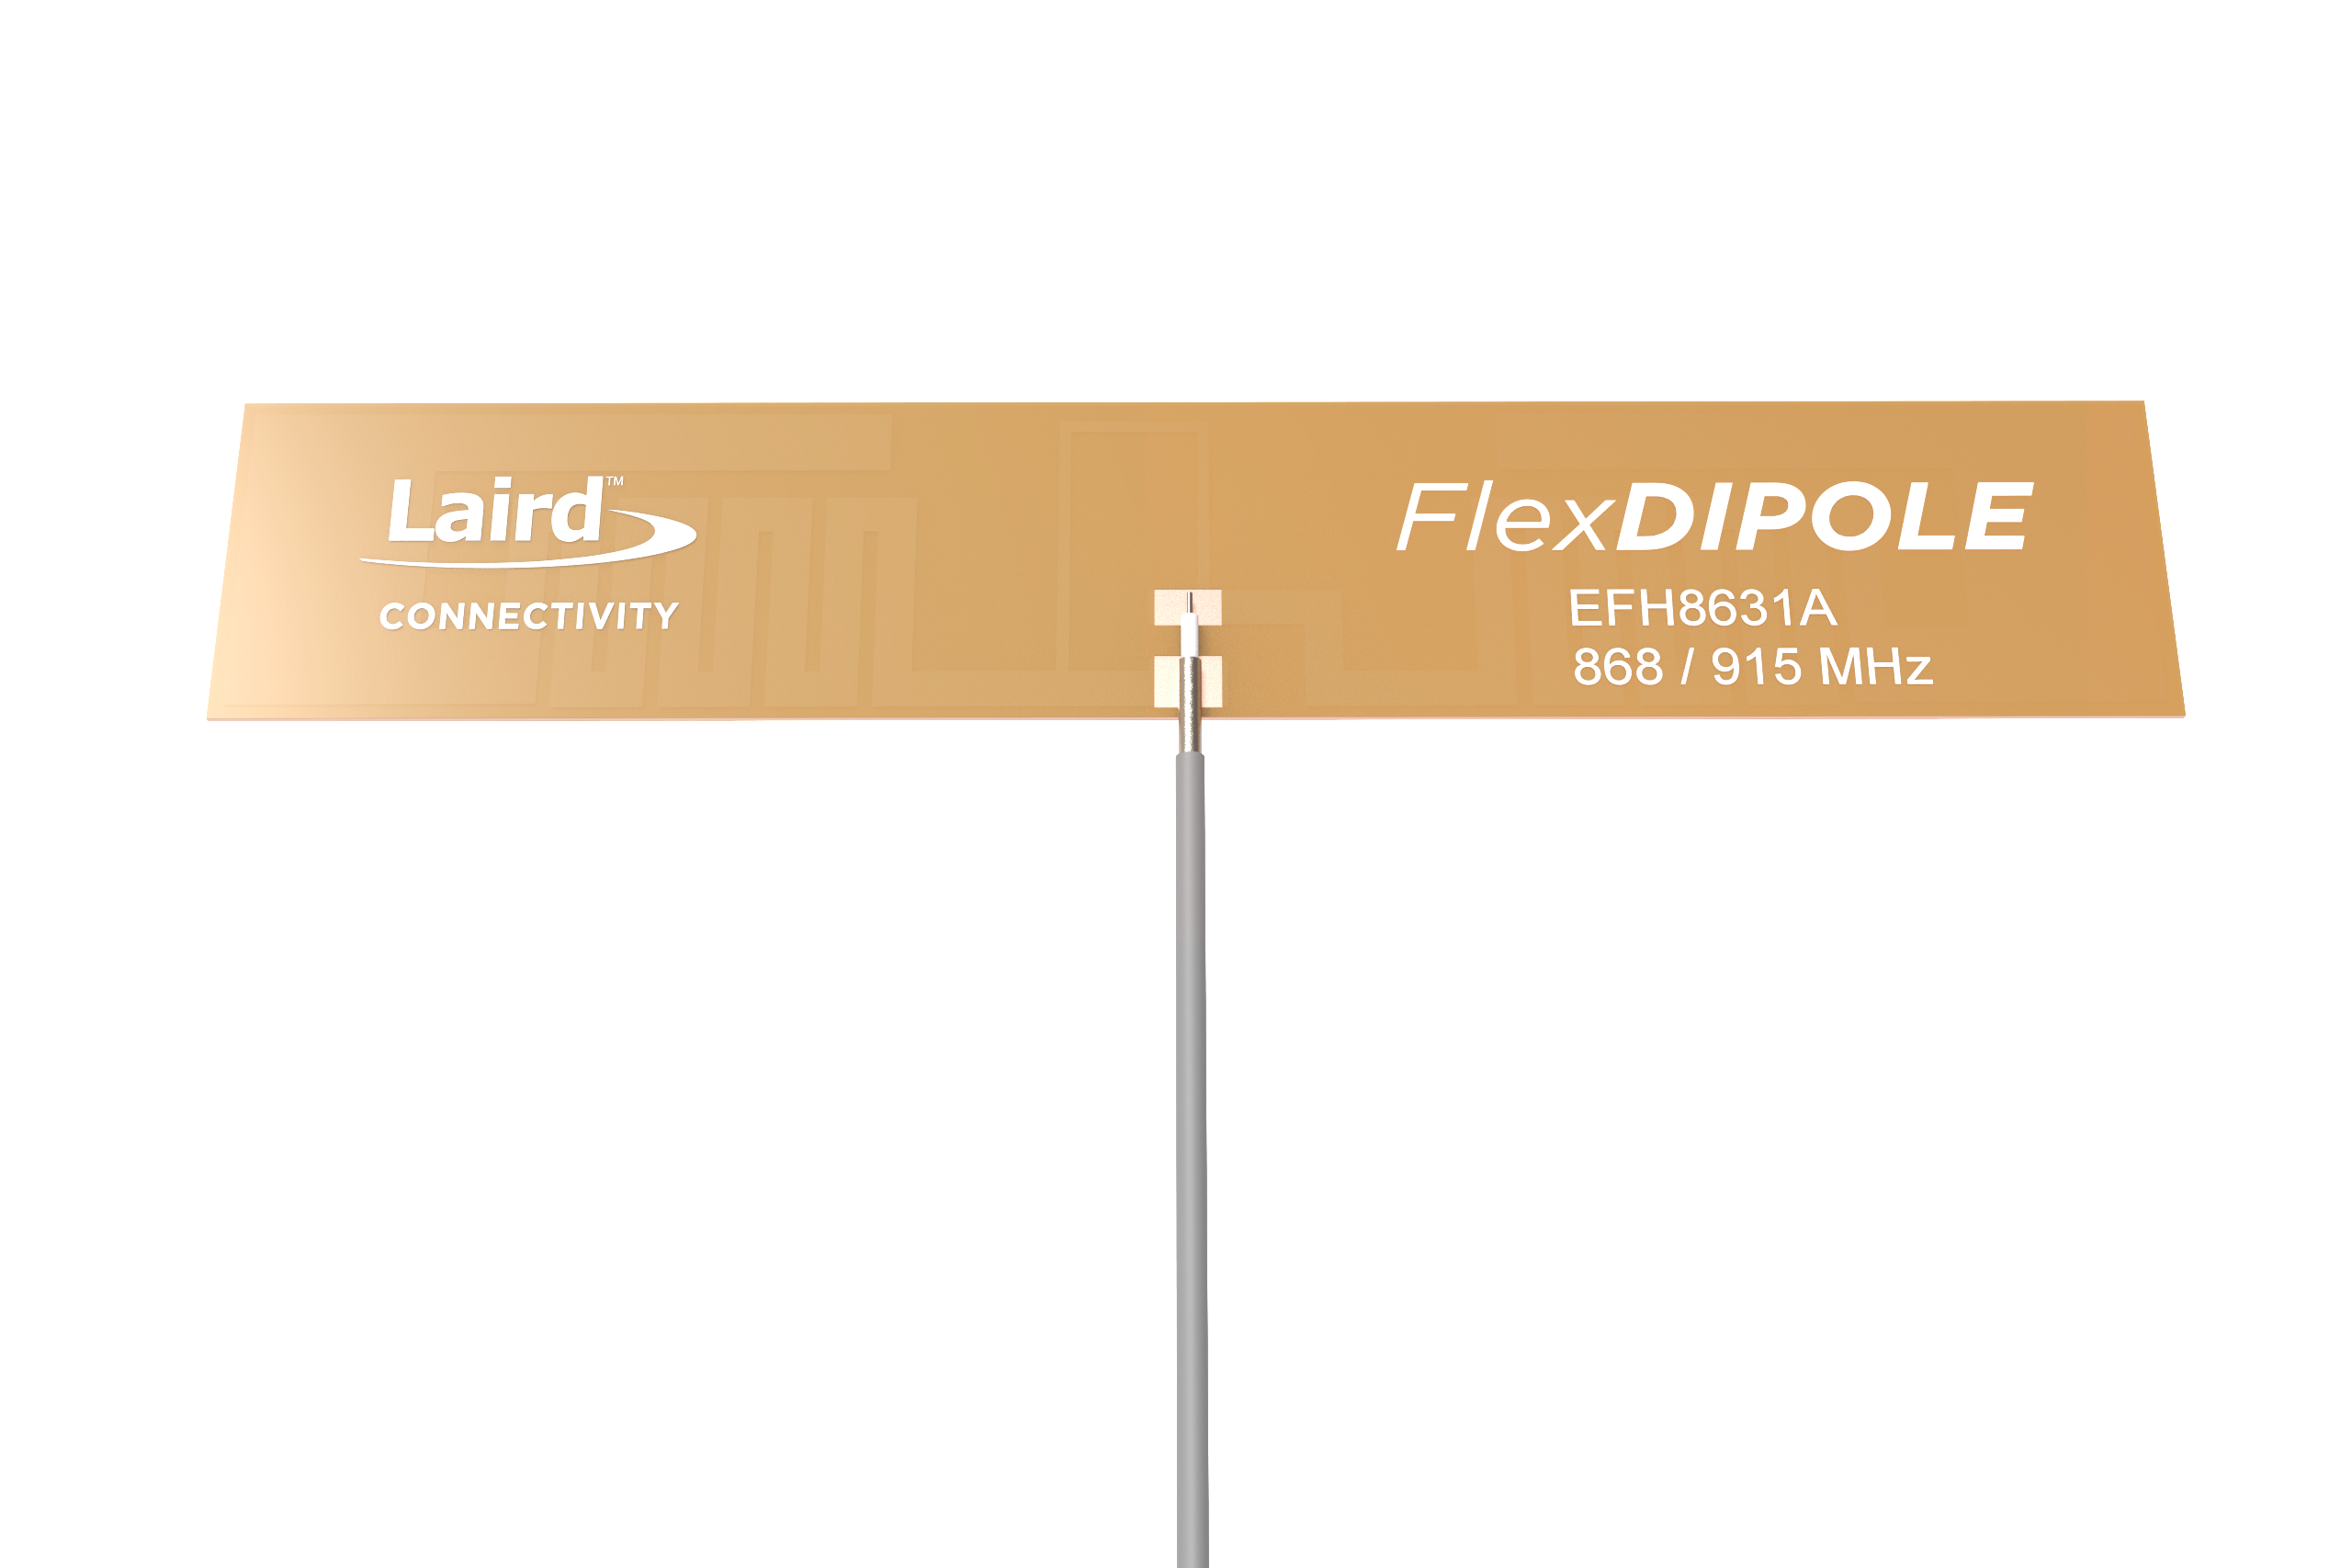 Coming Soon: Single FlexDIPOLE Antenna Solution for Entire 863-928MHz Frequency Range